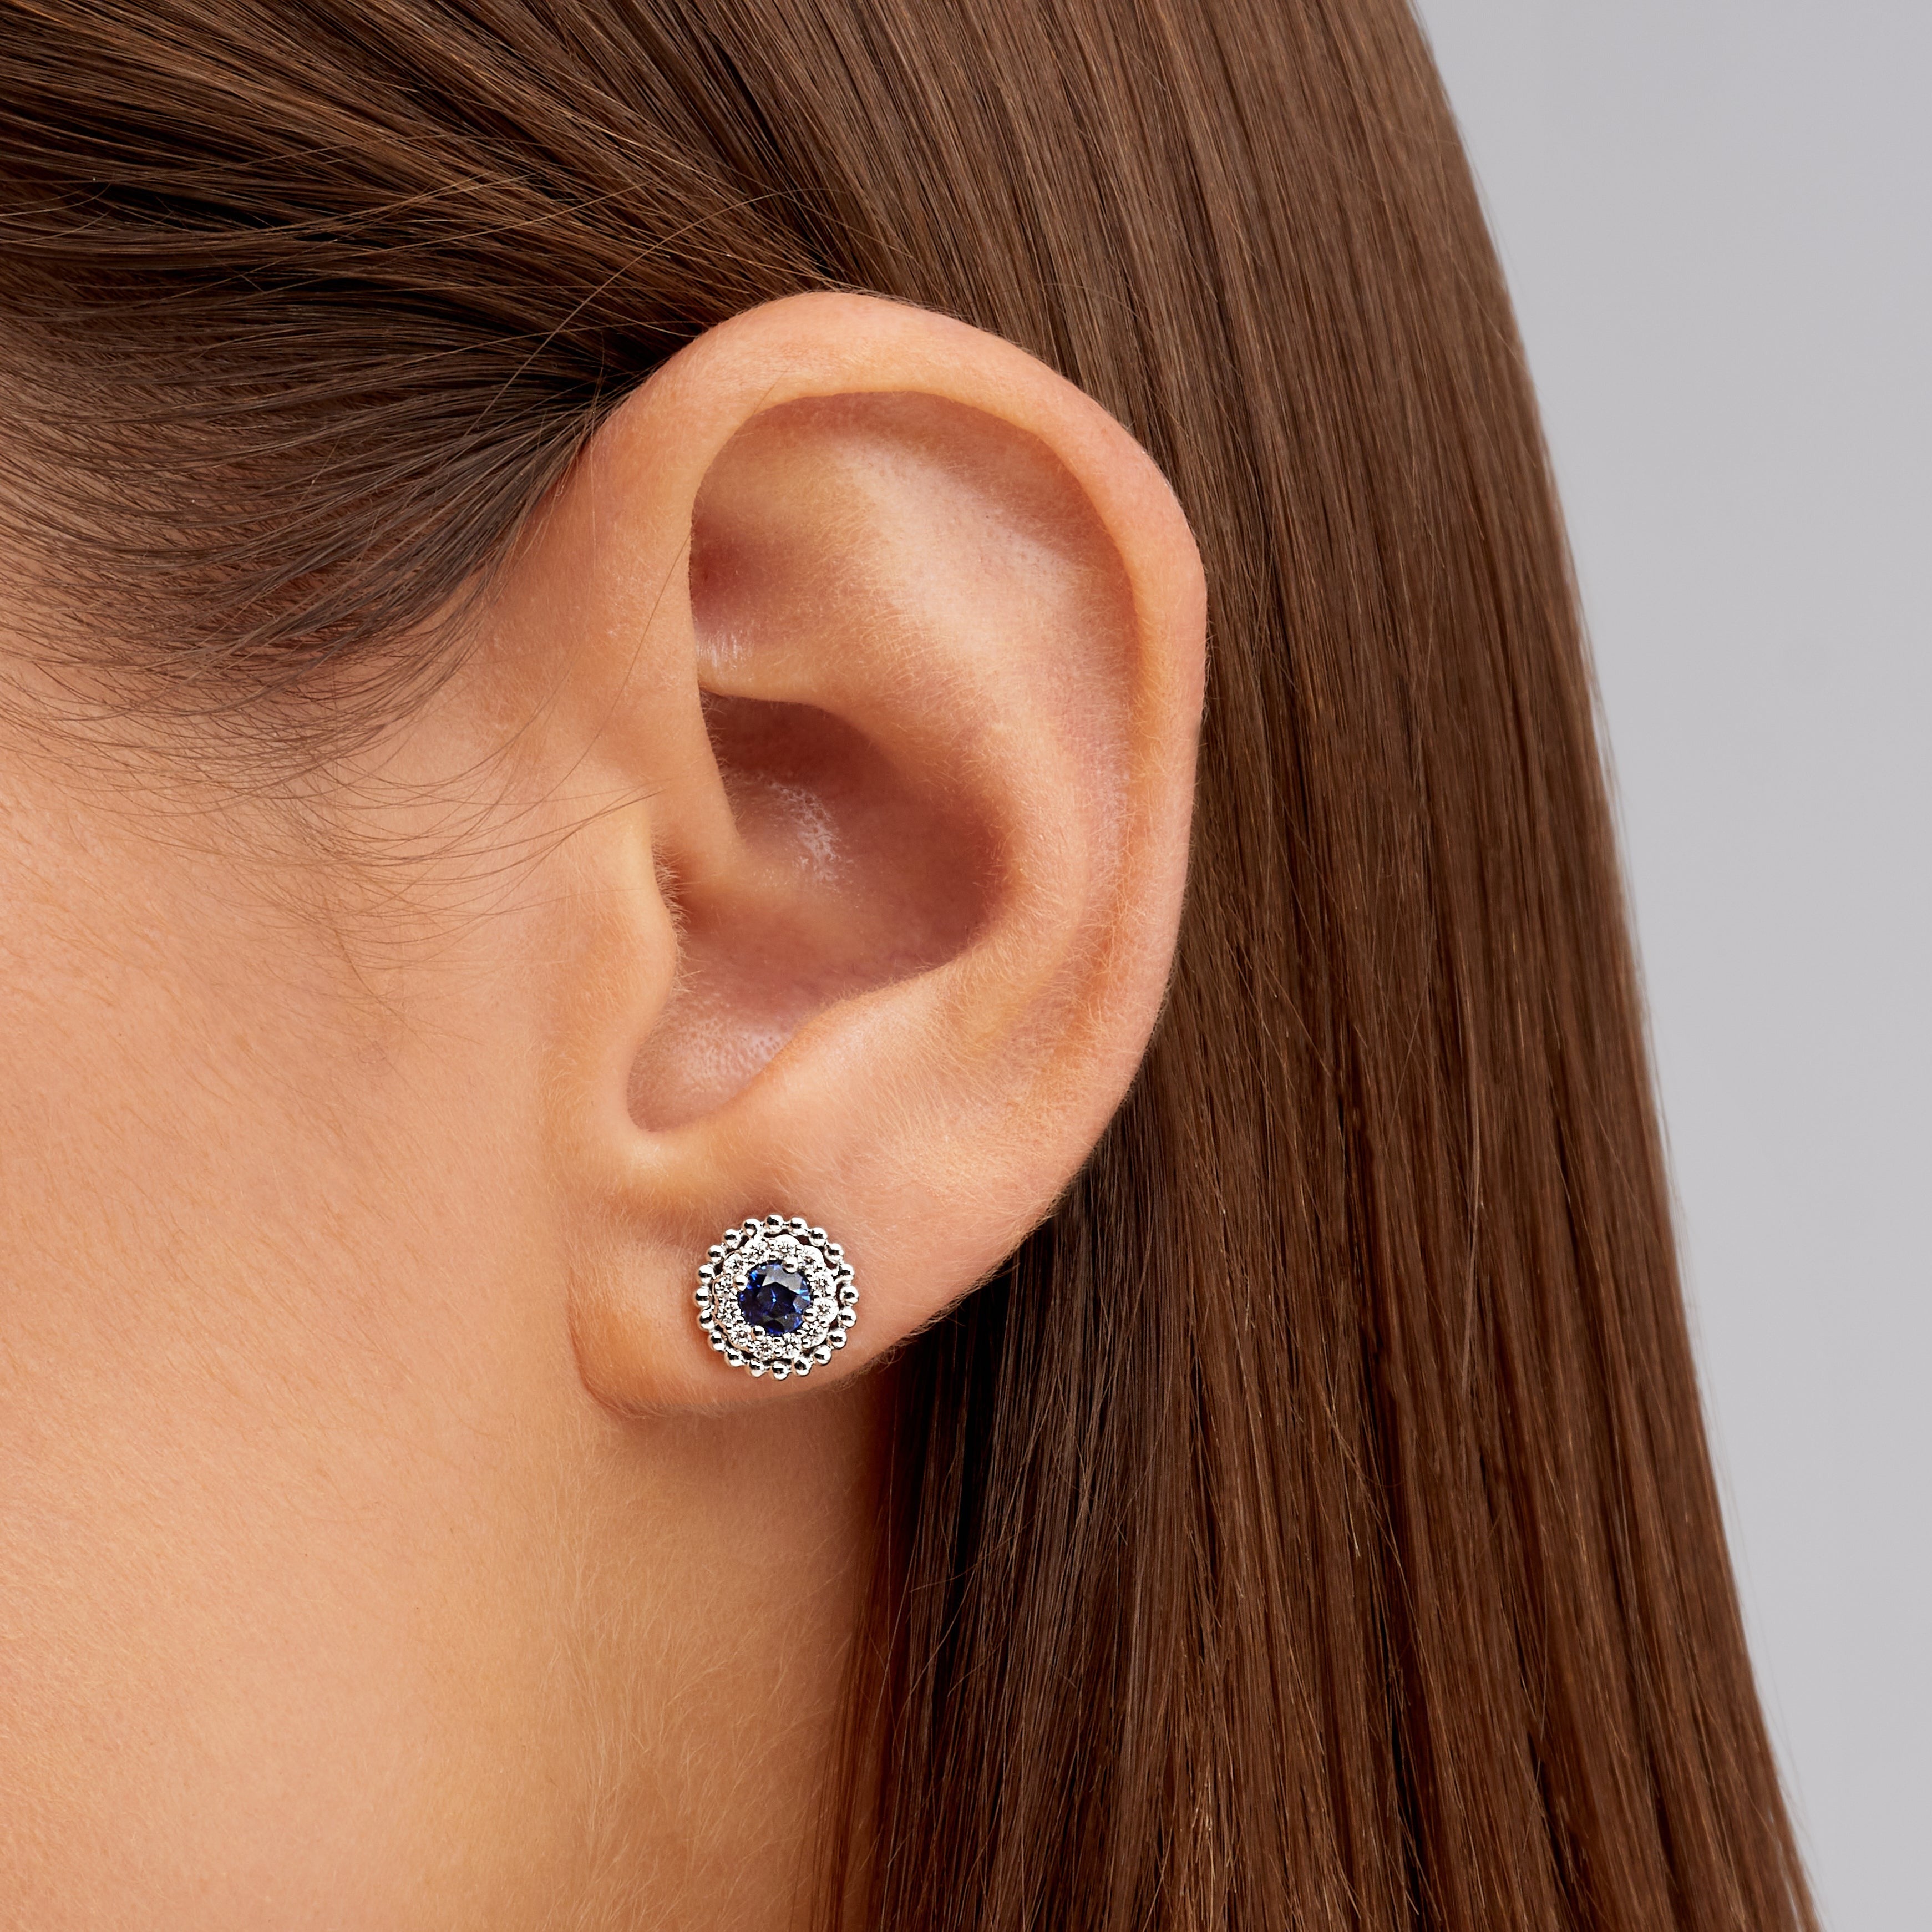 Sapphire Centered and Diamond Stud Earrings in 18K White Gold